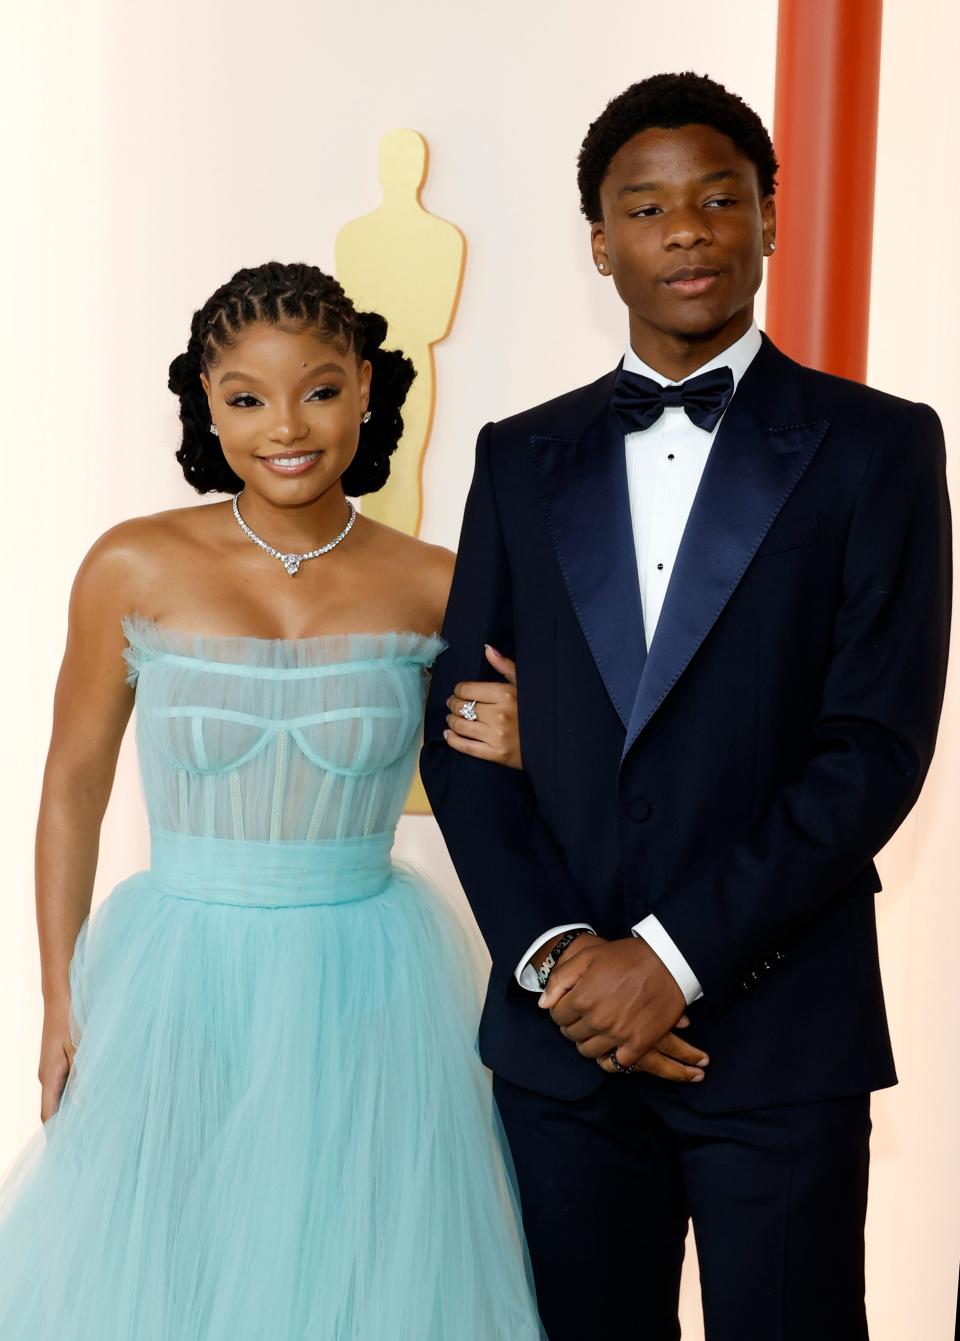 Halle Bailey and Branson Bailey attend the 95th Annual Academy Awards on March 12, 2023 in Hollywood, California.